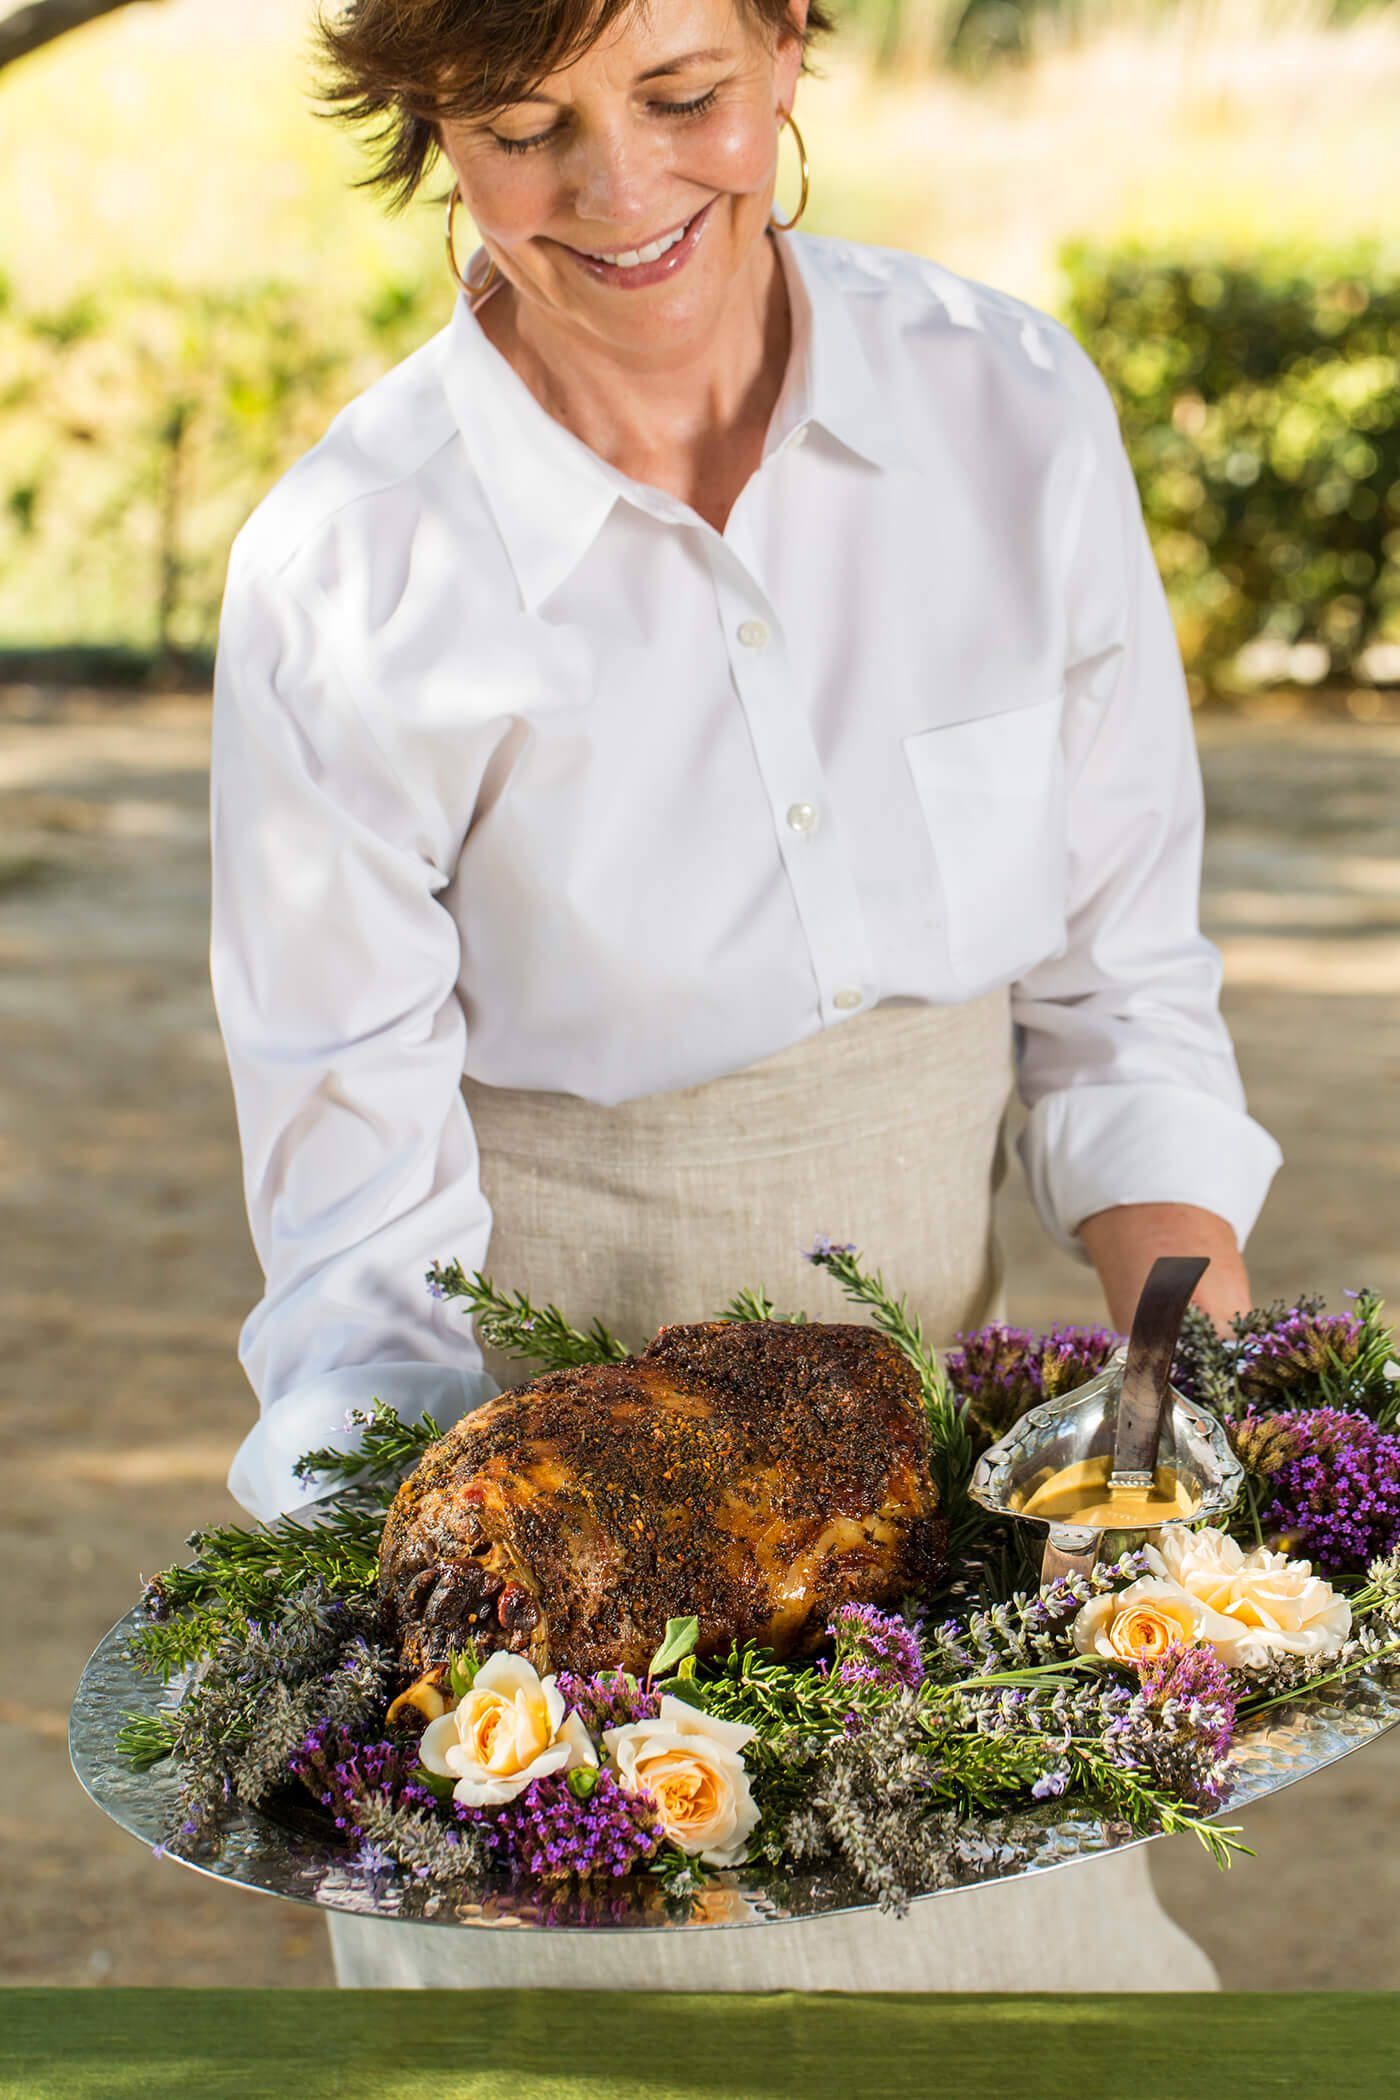 A woman is holding a platter covered in the slow roasted leg of lamb framed by freshly cut spring roses in the colors of purple and light orange